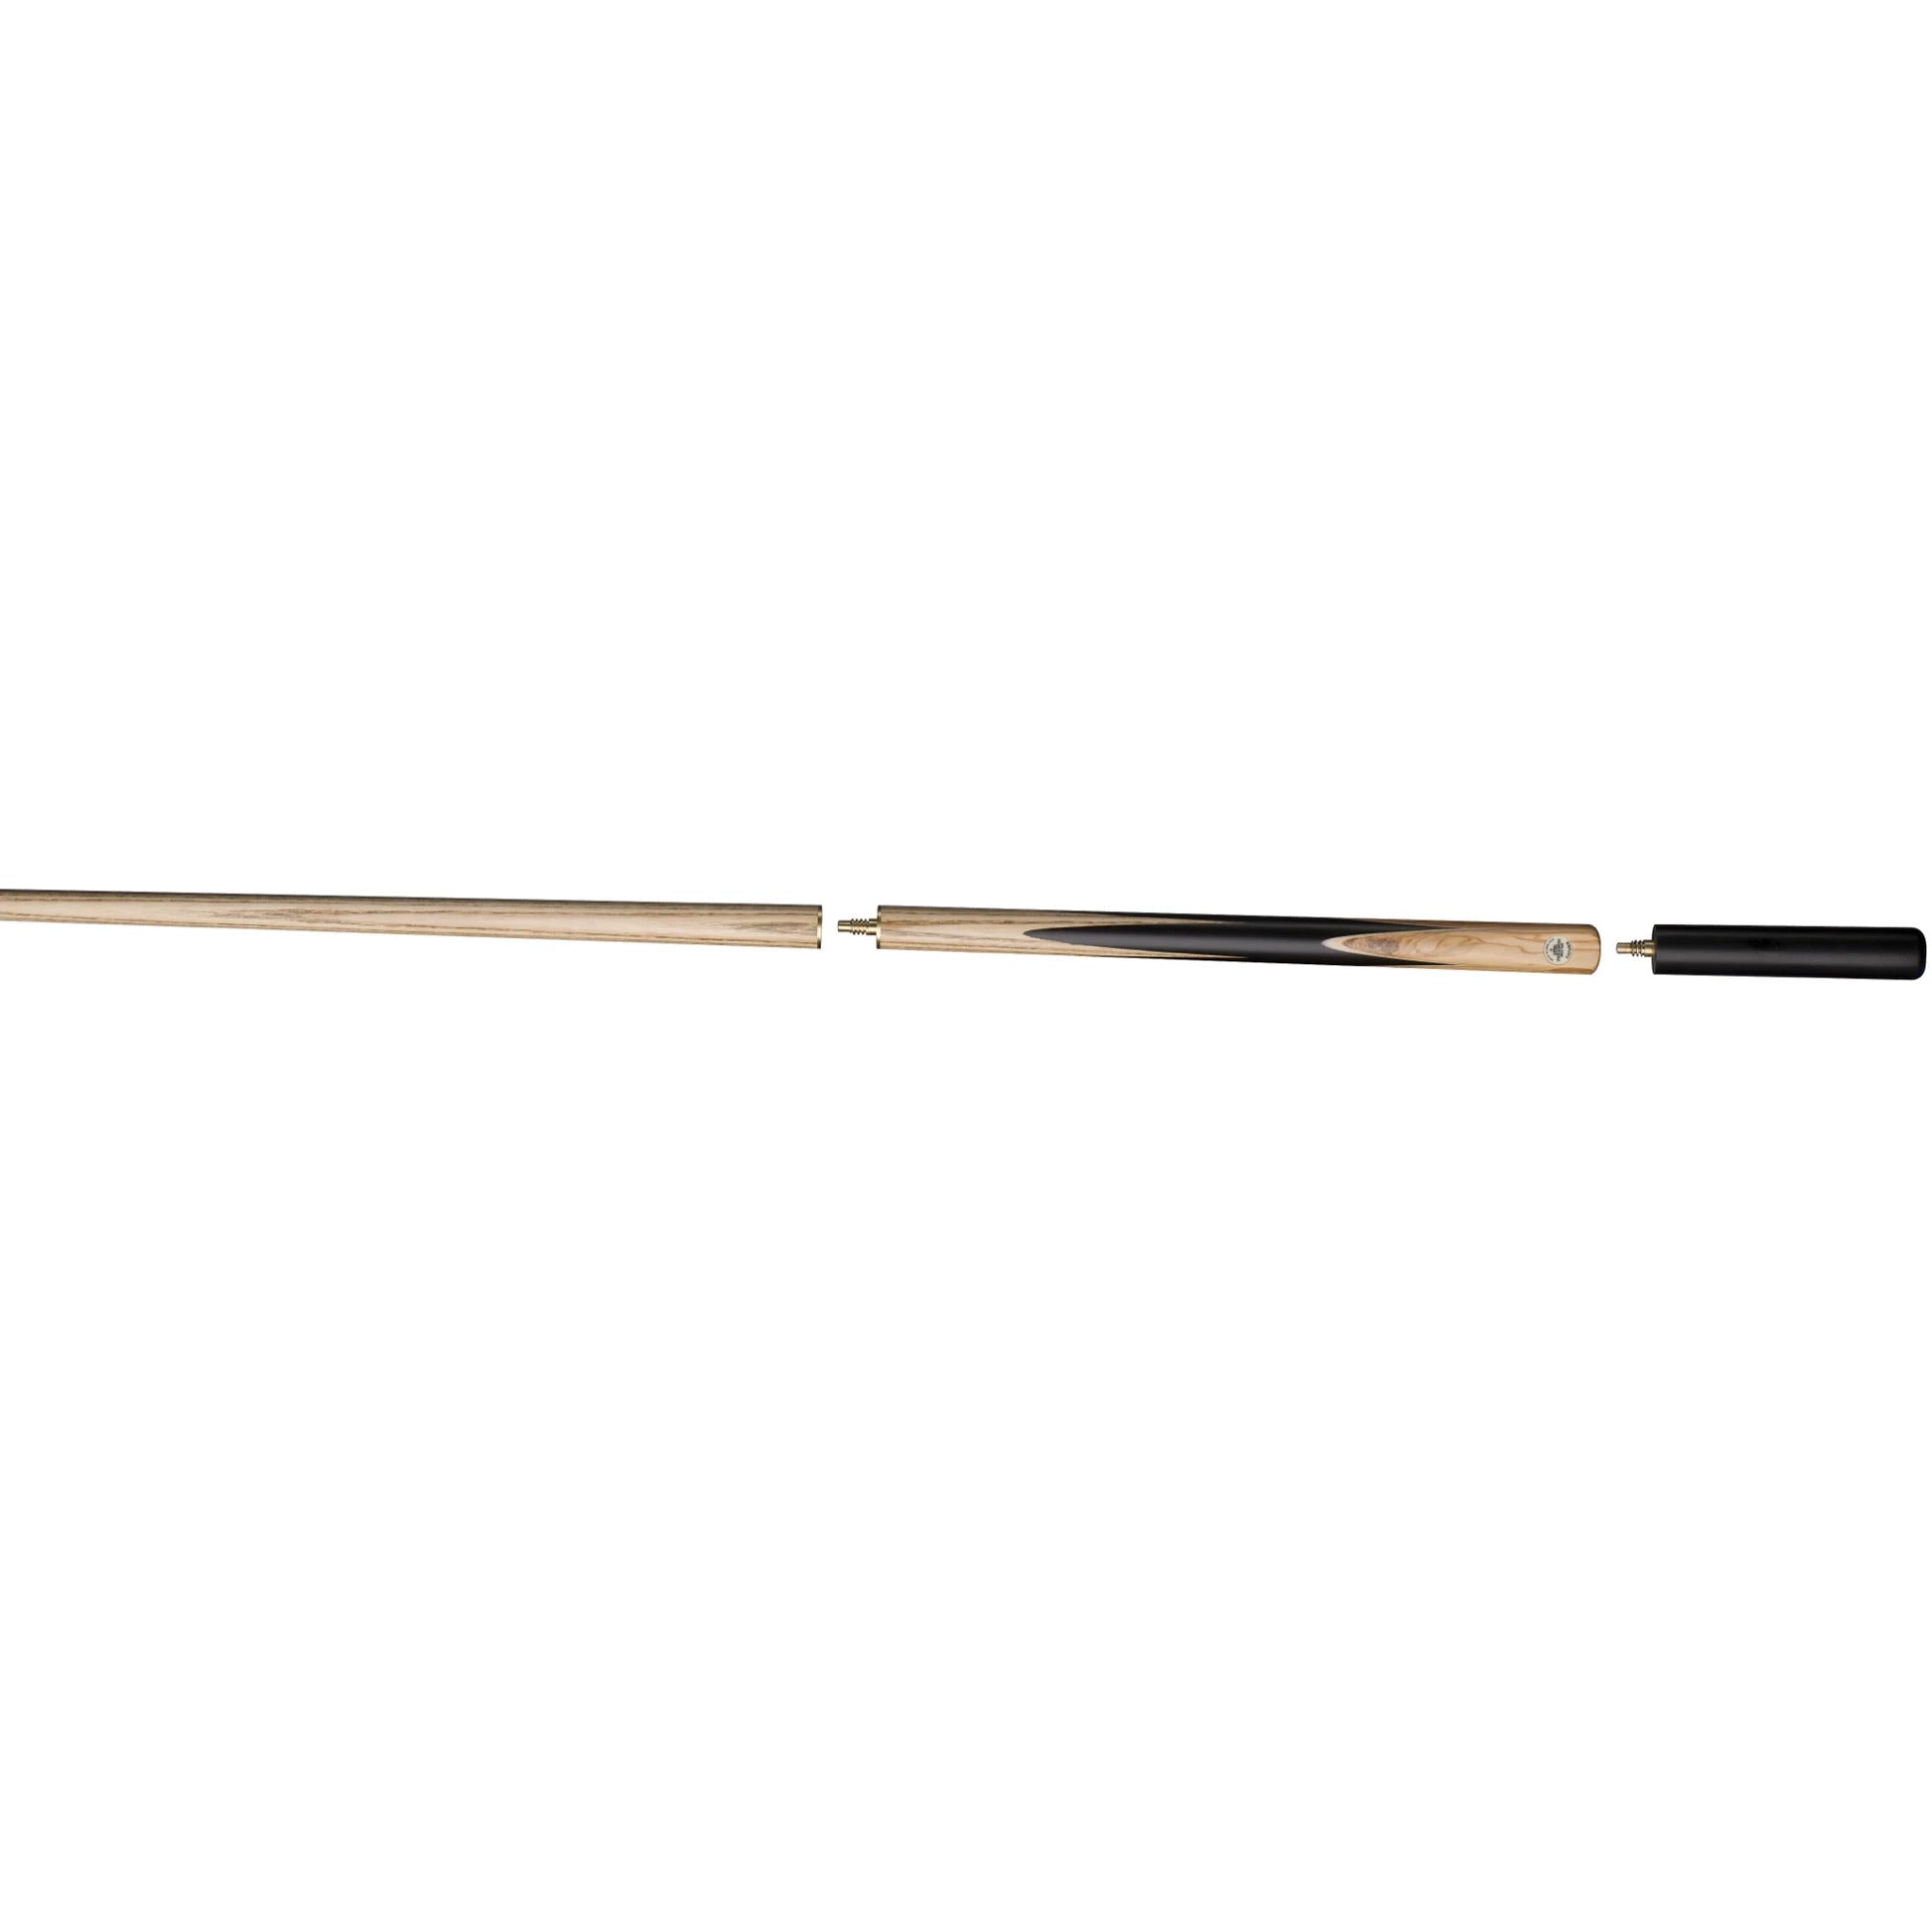 Peradon Saturn ¾ Jointed 8 Ball Pool Cue with Mini Butt